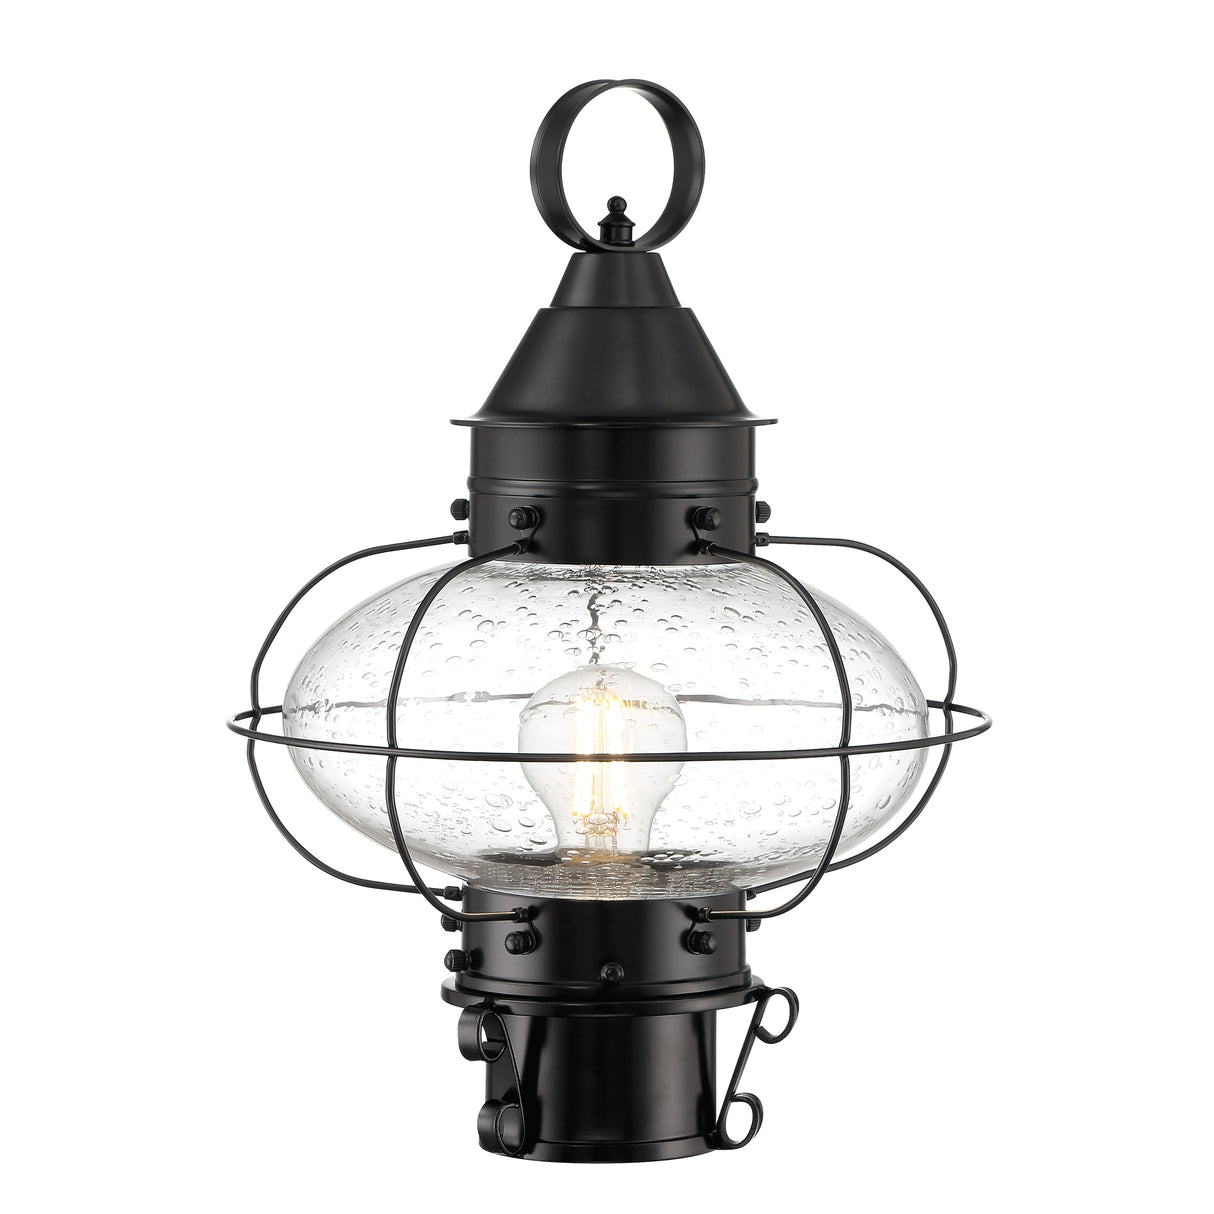 Elk 1321-BL-SE Cottage Onion Outdoor Post Lantern - Black with Seeded Glass